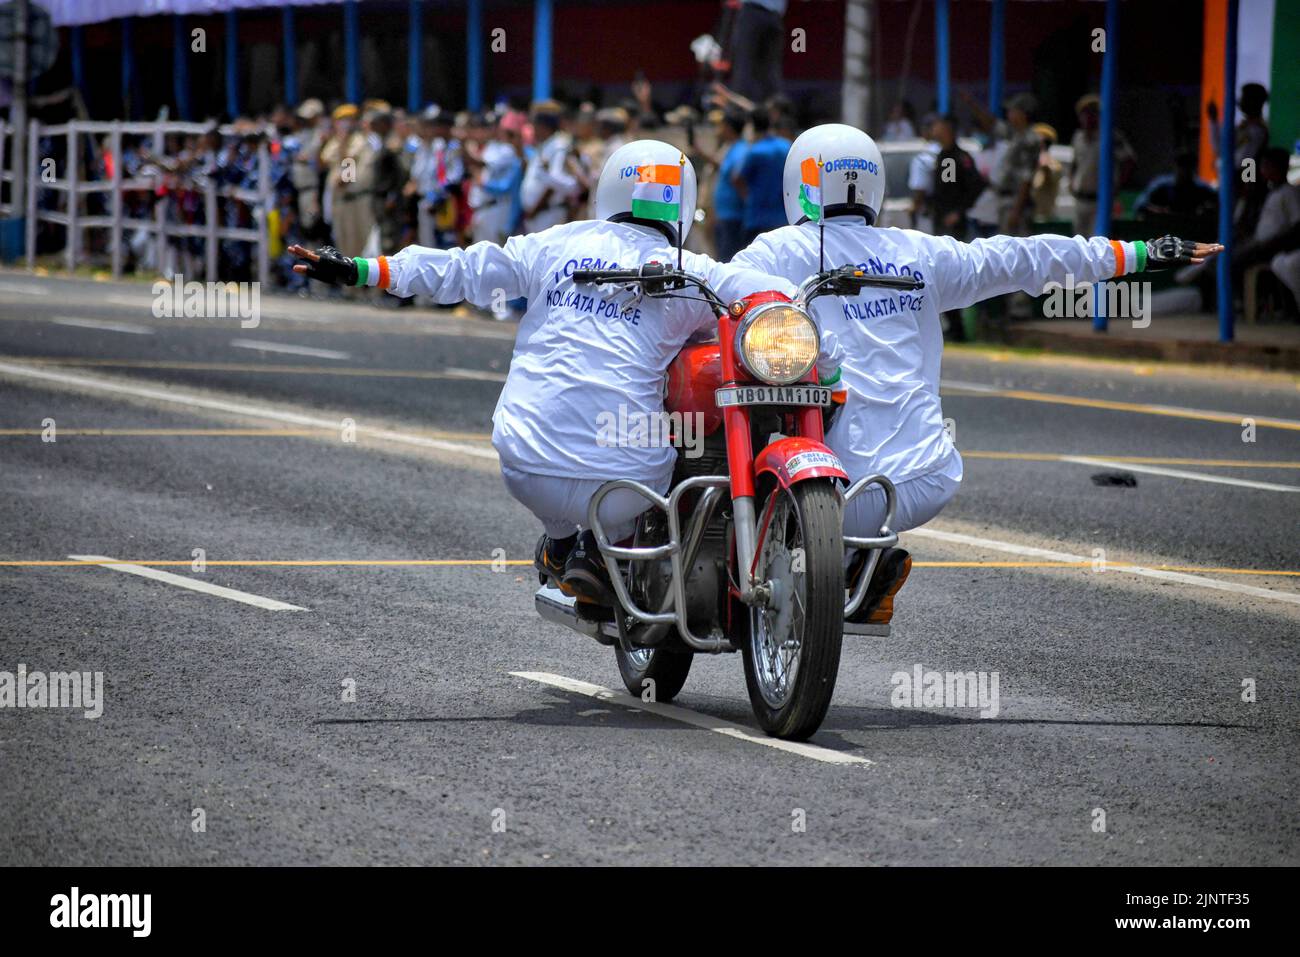 Kolkata Police officers seen practicing different stunts on bikes during the Independence day Final Dress Rehearsal. India prepares to celebrate the 75th Independence day on 15th August 2022 as part of the Azadi Ka Amrit Mahotsav celebration. Stock Photo